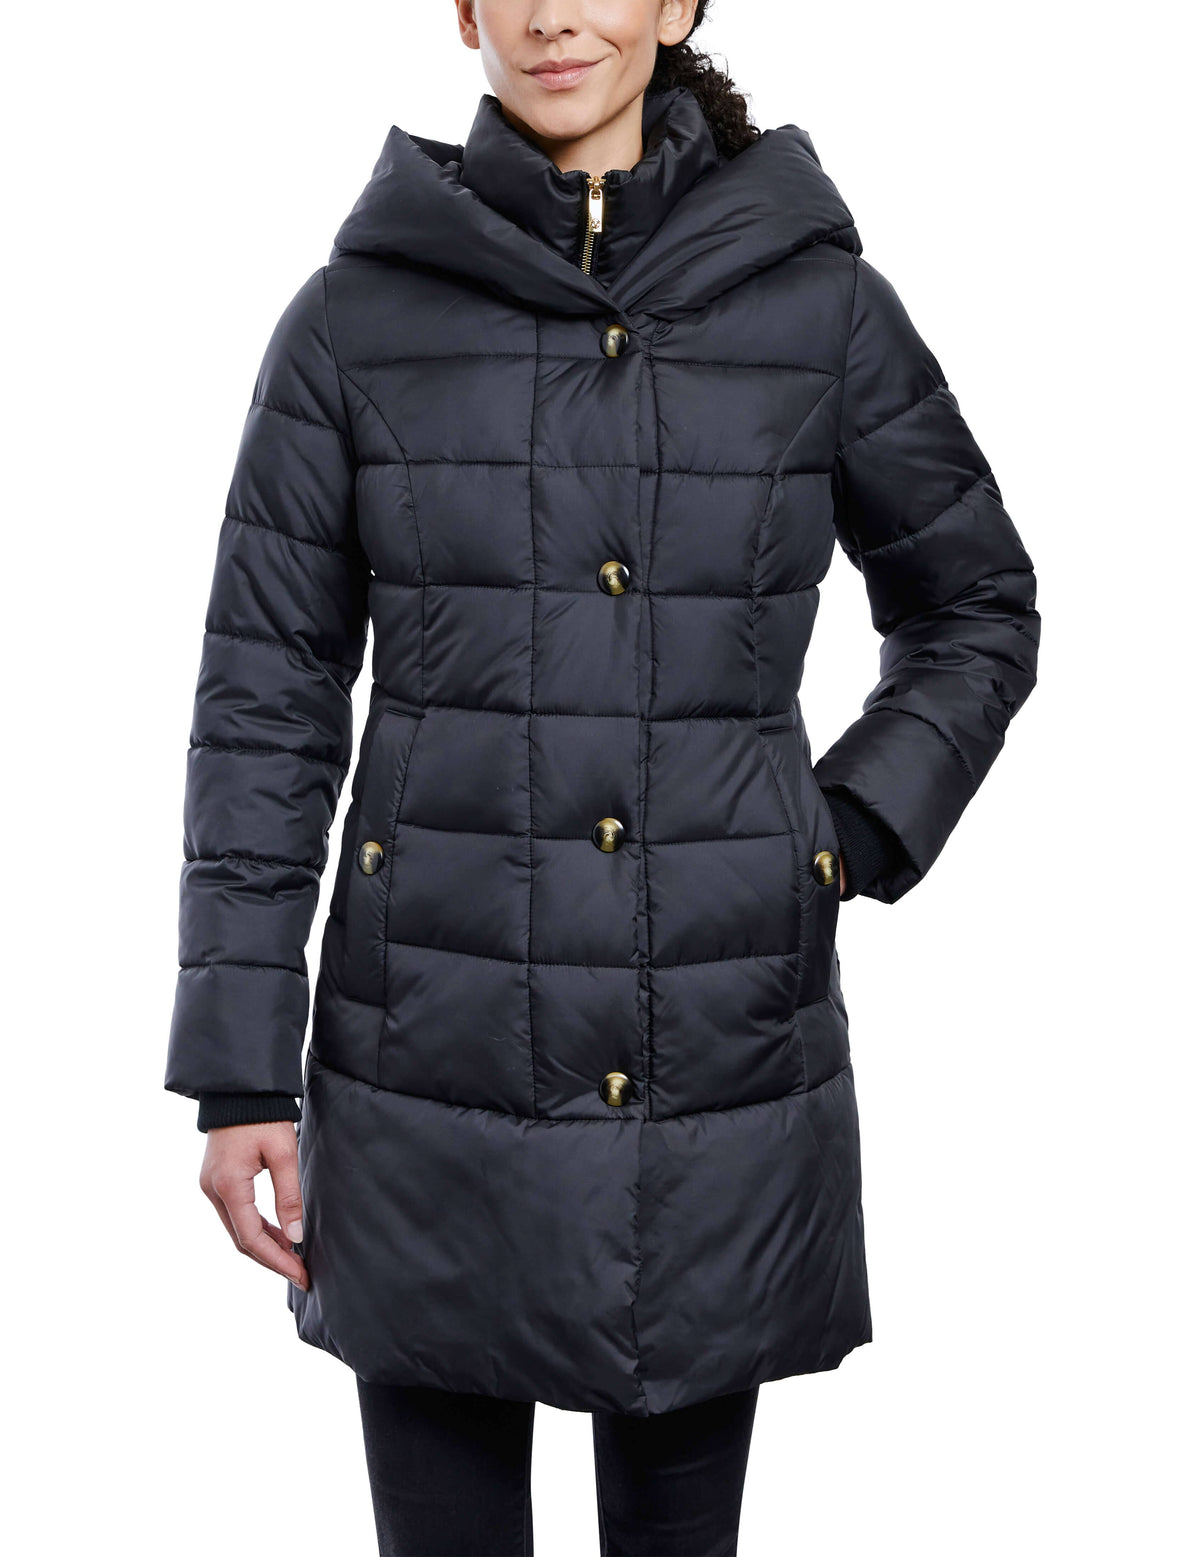 Anne Klein Black Consider It Snap Front Puffer Jacket - Clearance